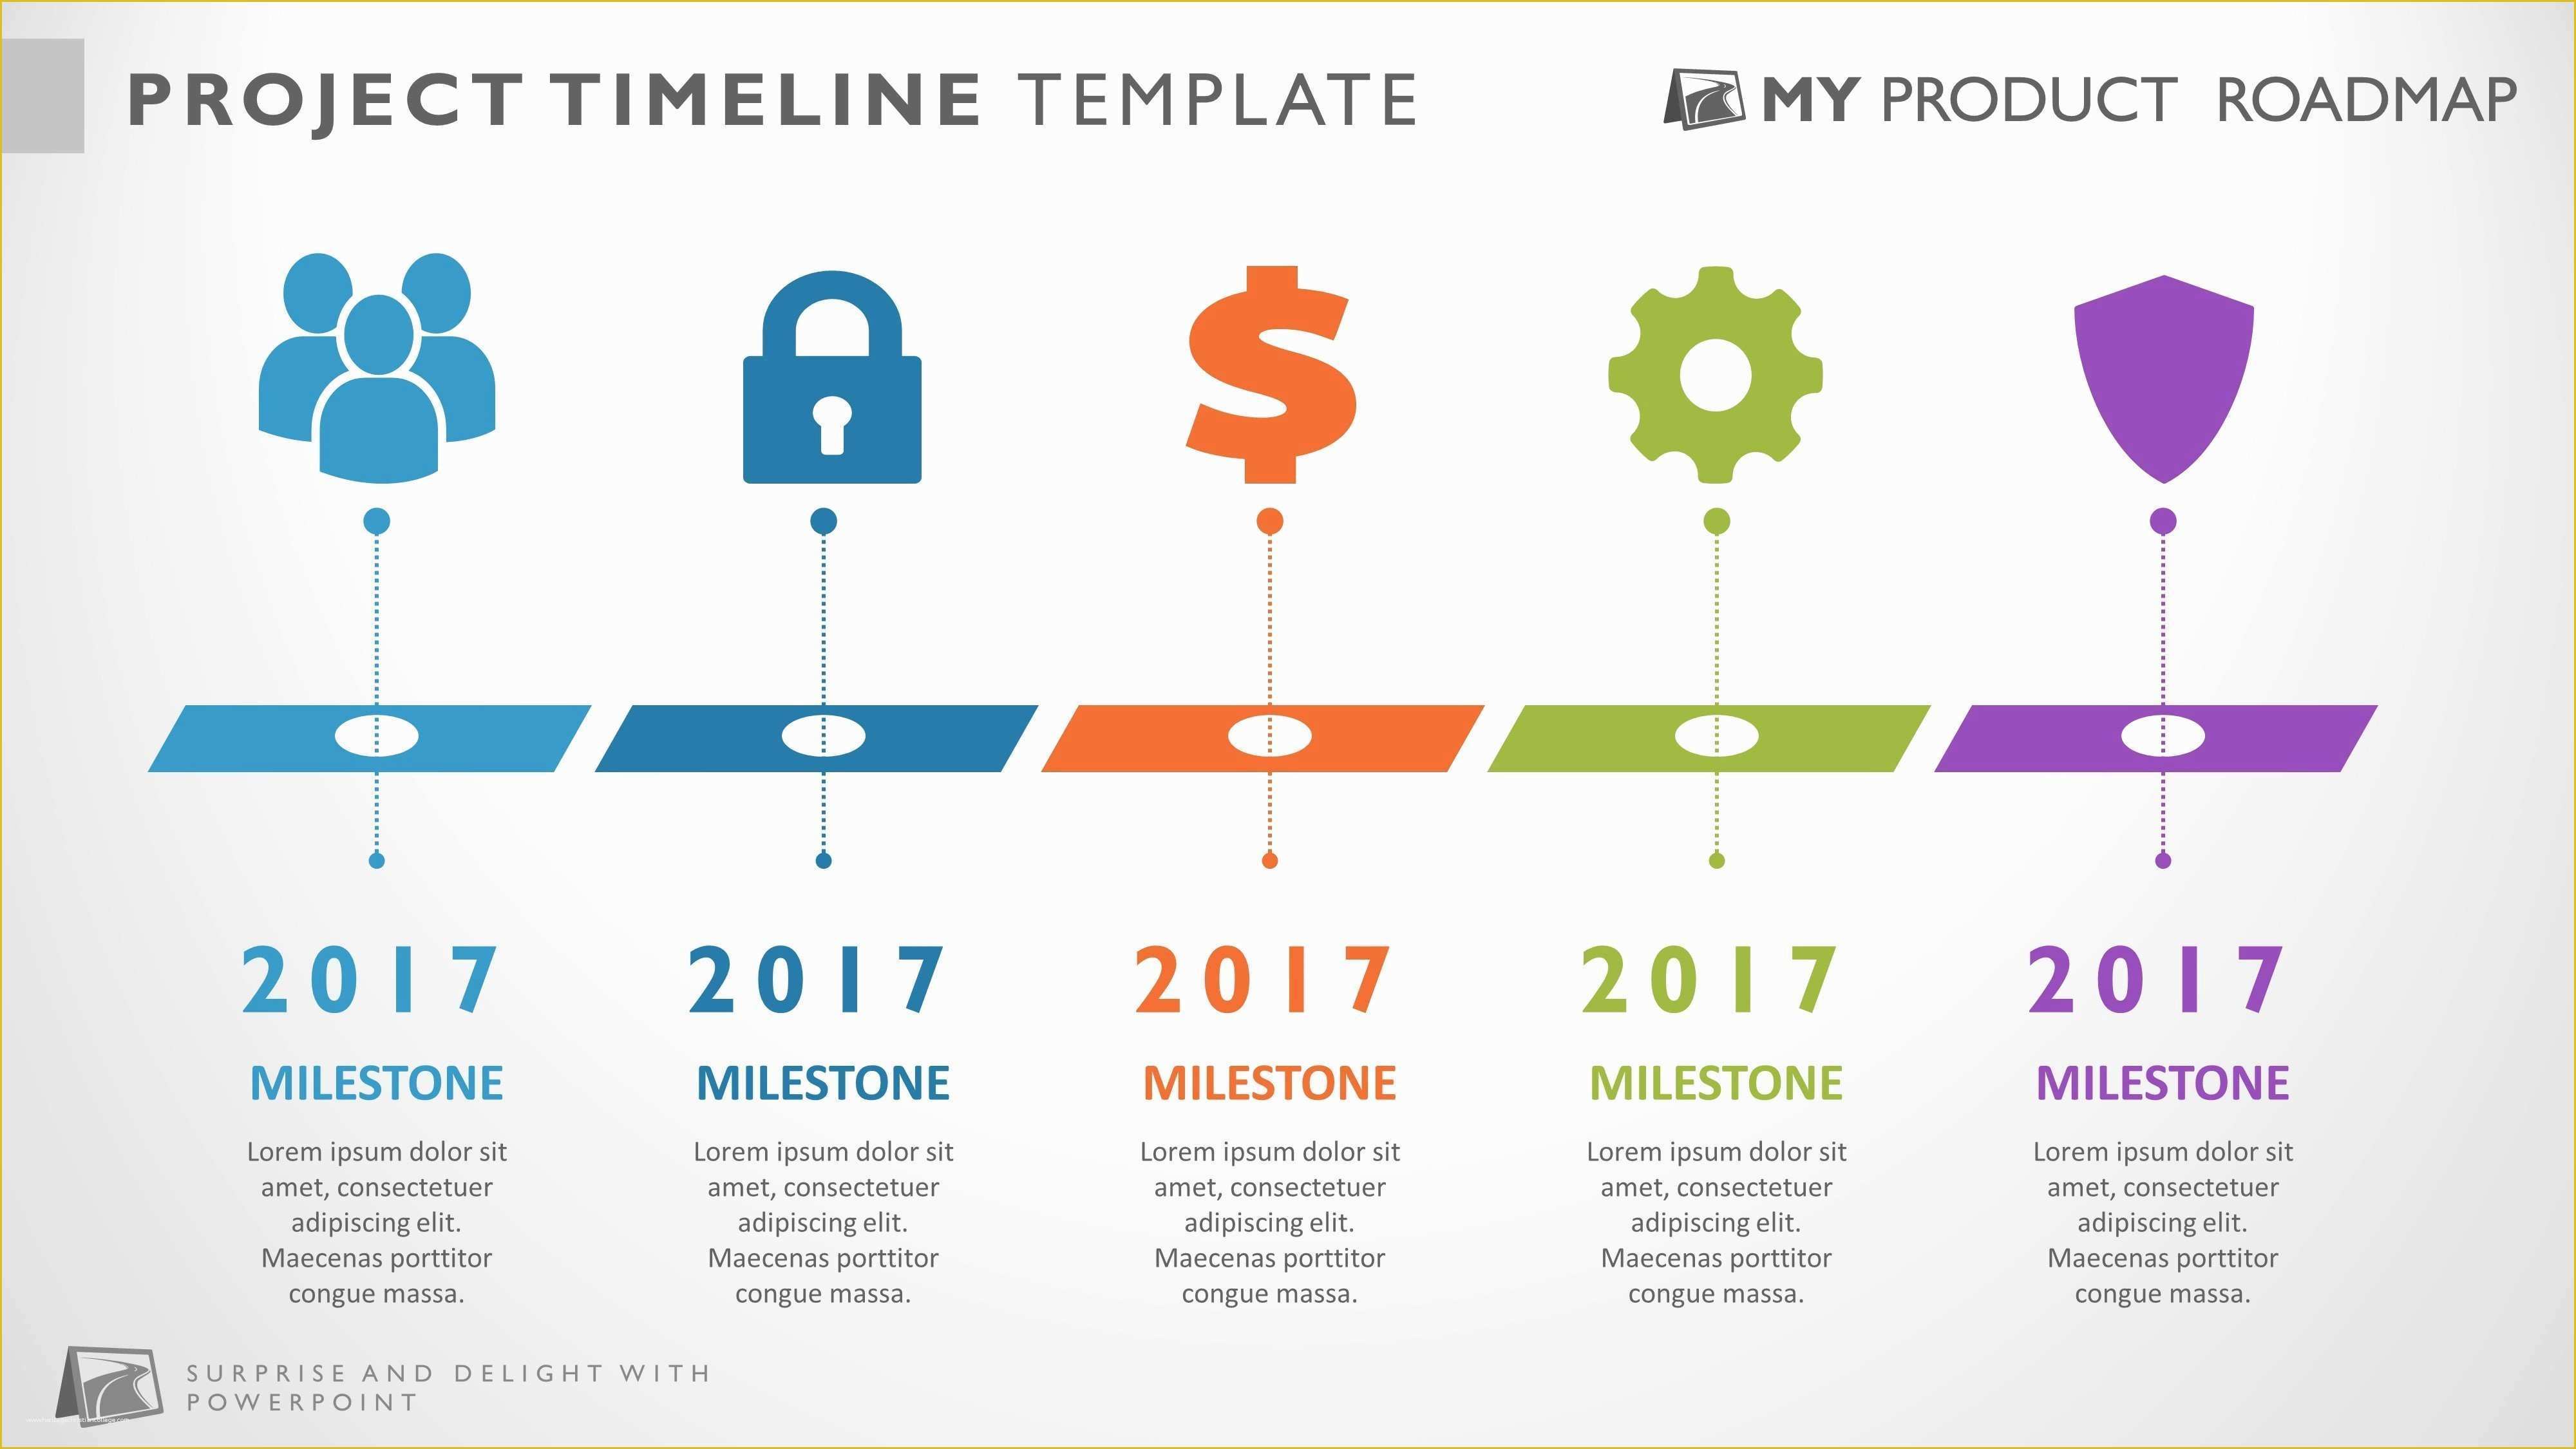 free infographic templates powerpoint